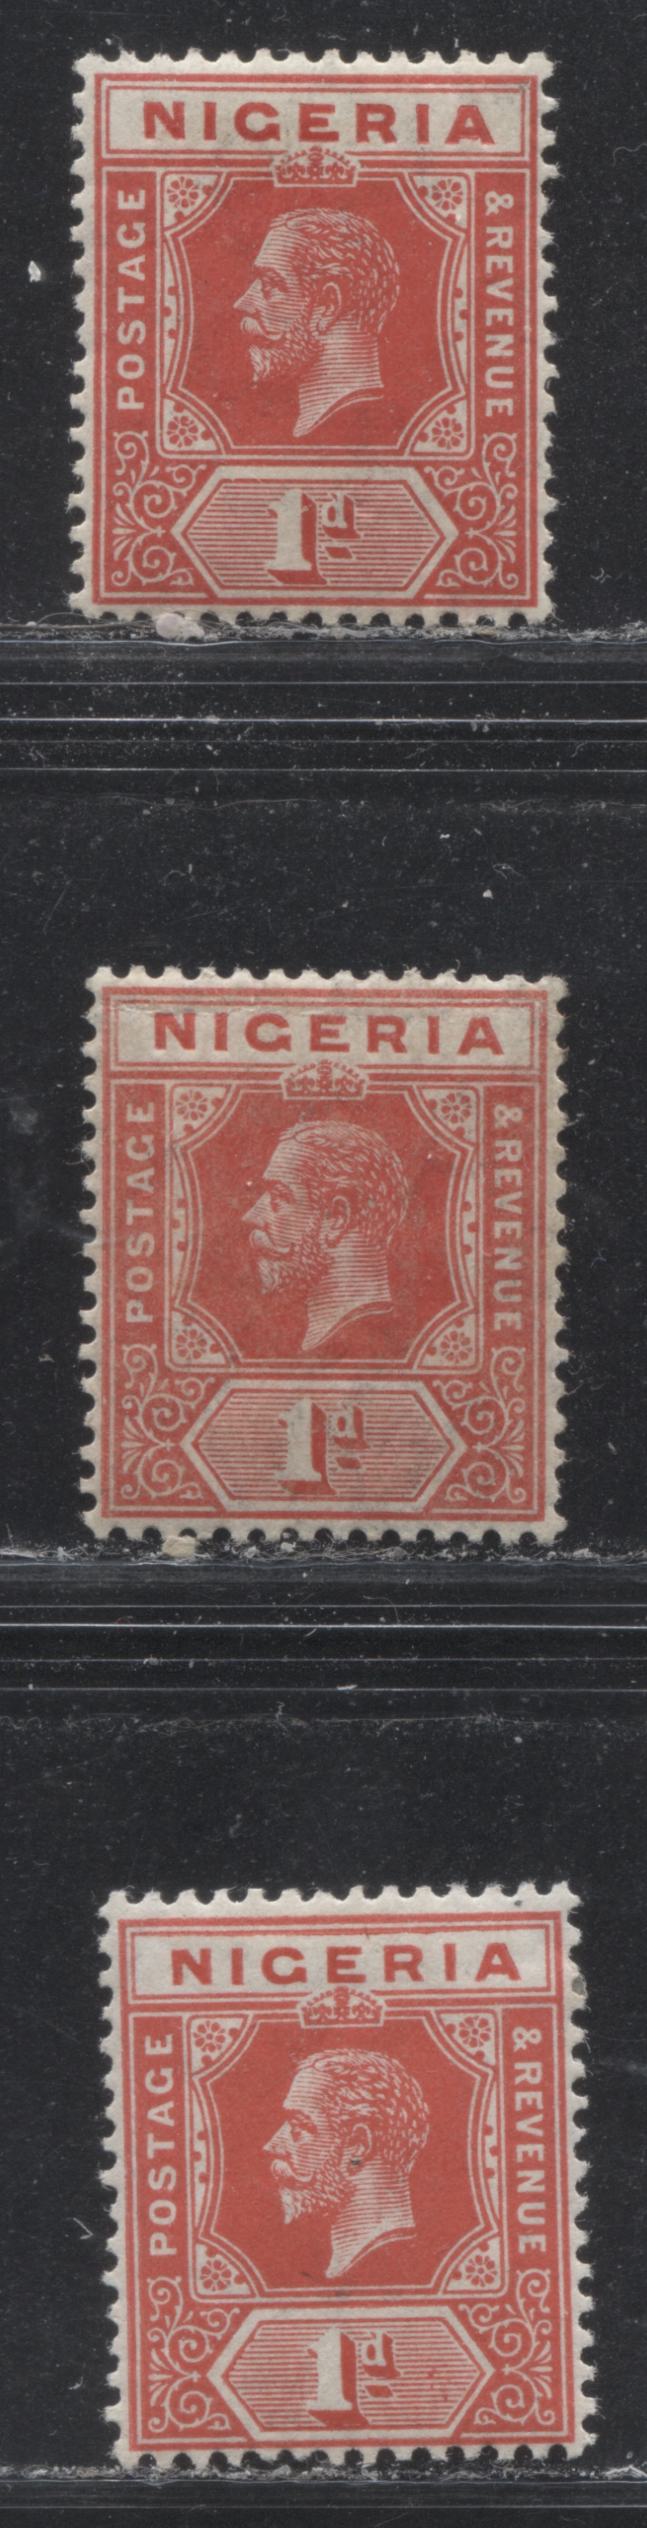 Lot 173 Nigeria SG# 2a 1d Scarlet King George V, 1914-1921 Multiple Crown CA Imperium Keyplate Issue, Three VFOG Examples, From Different Printings, Each a Slightly Different Shade